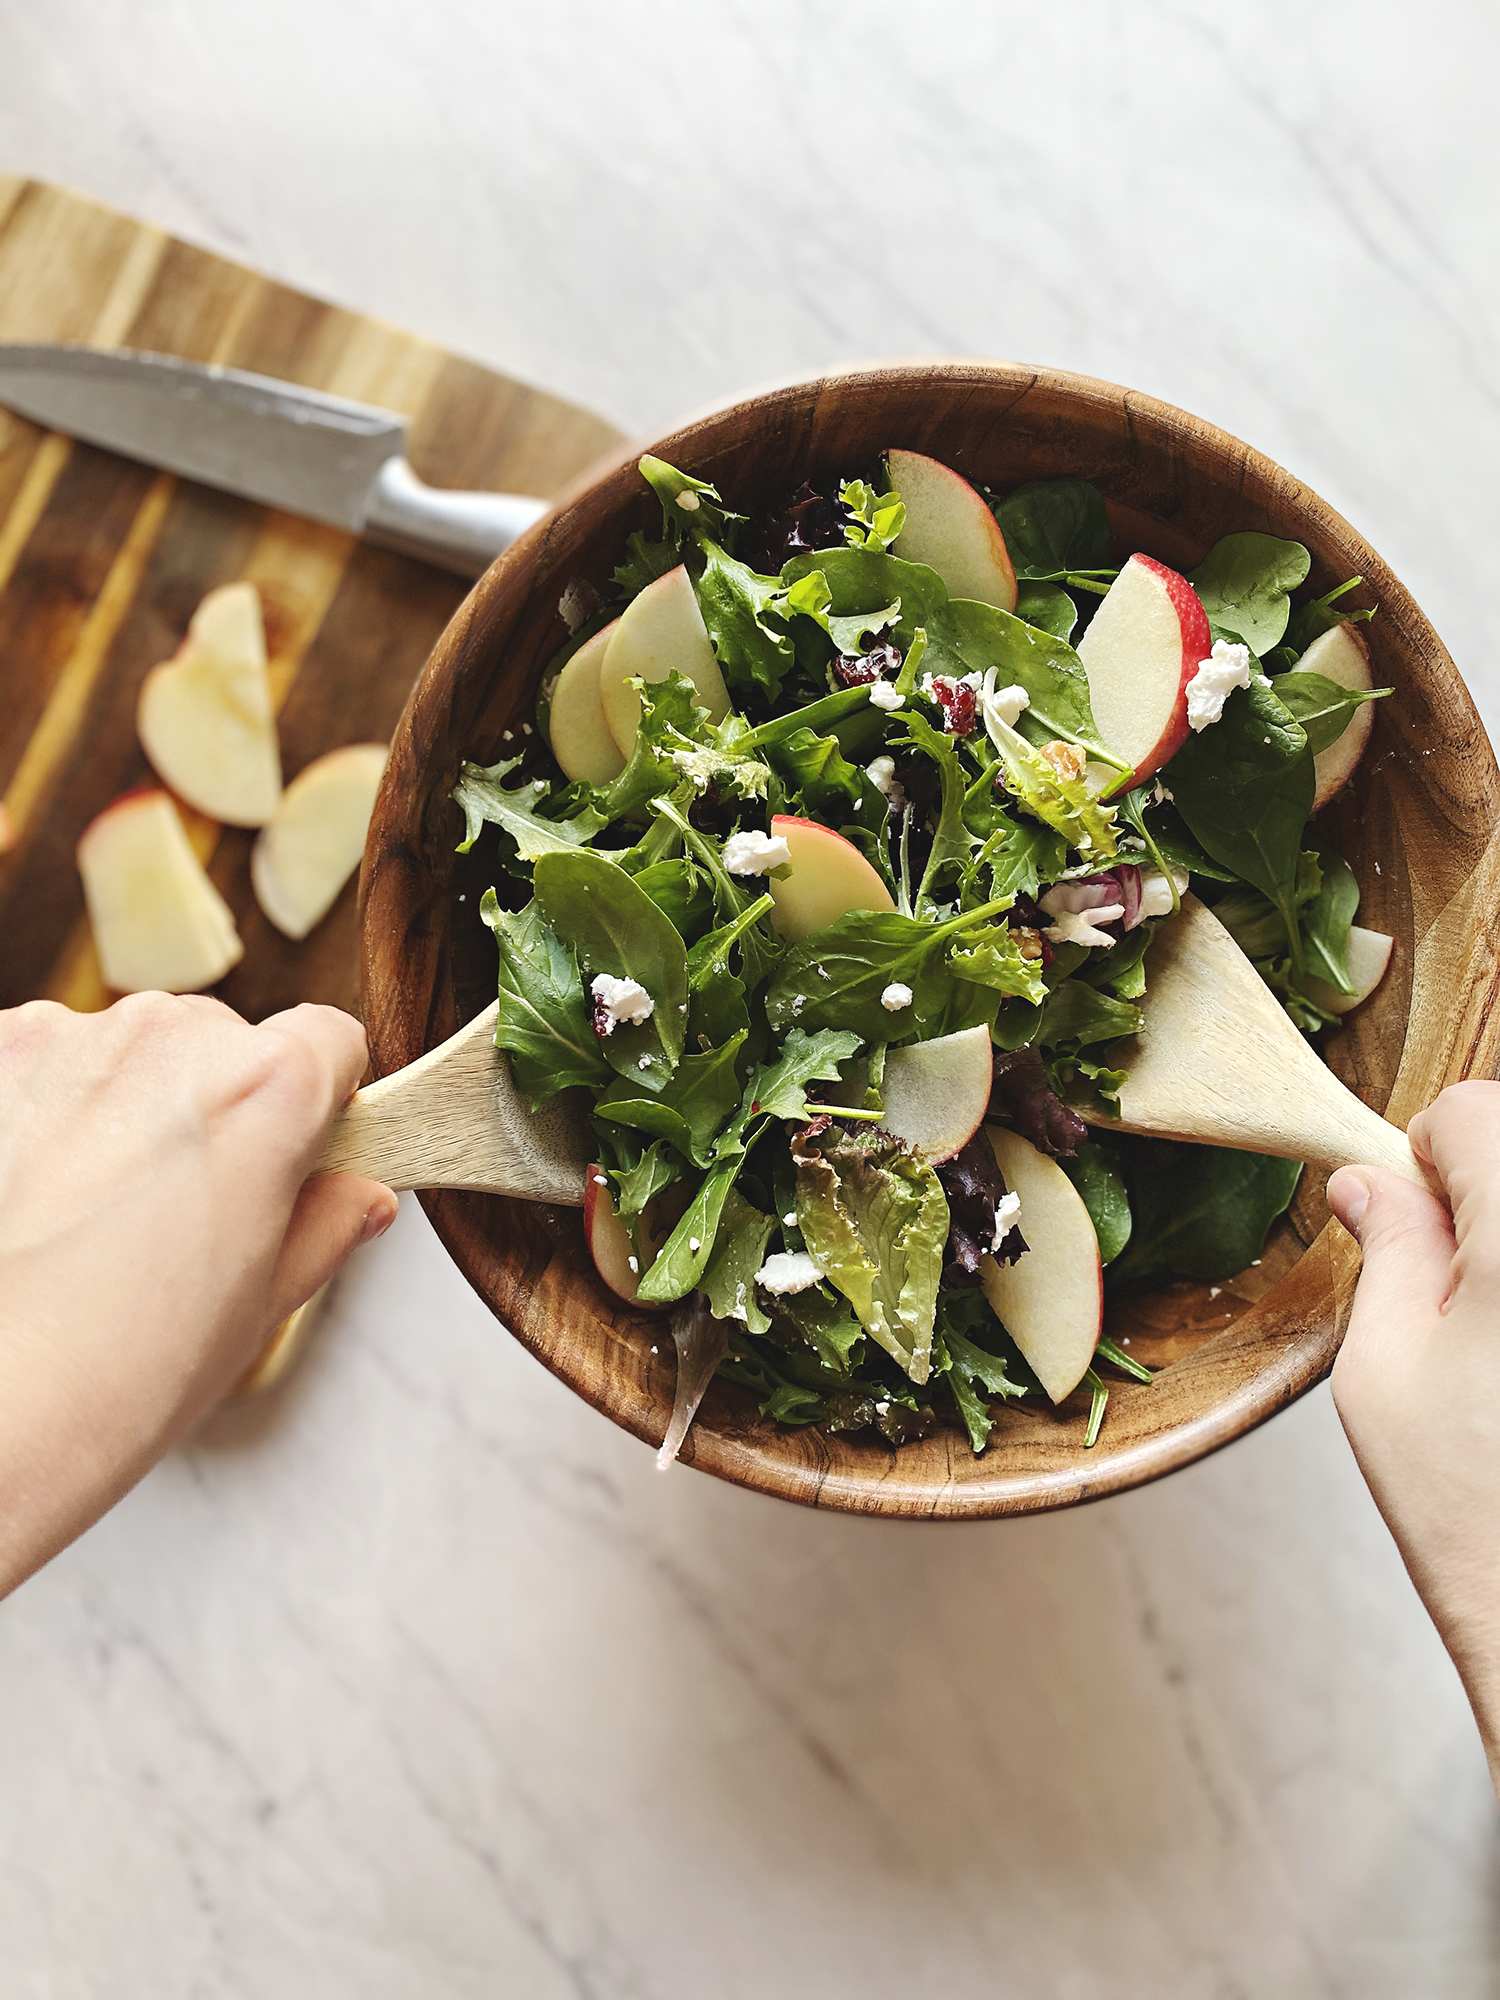 A delicious apple and walnut salad, perfect for the winter months. Easily thrown together and a favorite to add alongside your dinners. Get the full recipe on Haus of Layne! #Recipe #Salad #WinterSalad #Walnut #Cranberry #Apple #SaladRecipe #FreshRecipe